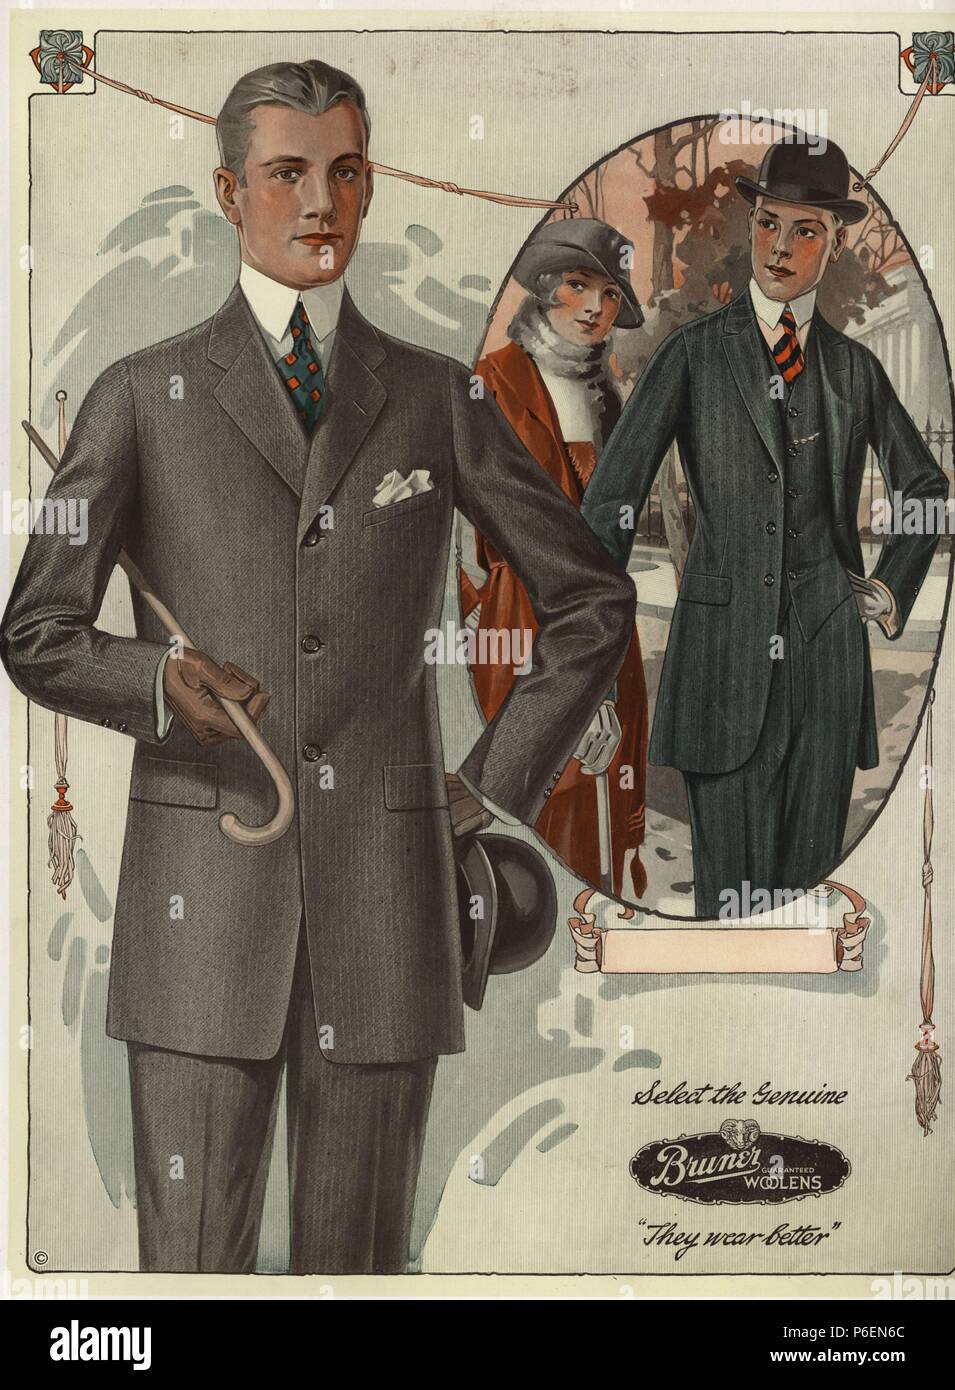 Men's single-breasted suits in sack. Chromolithograph from a catalog of male winter fashions from Bruner Woolens, 1920. Stock Photo